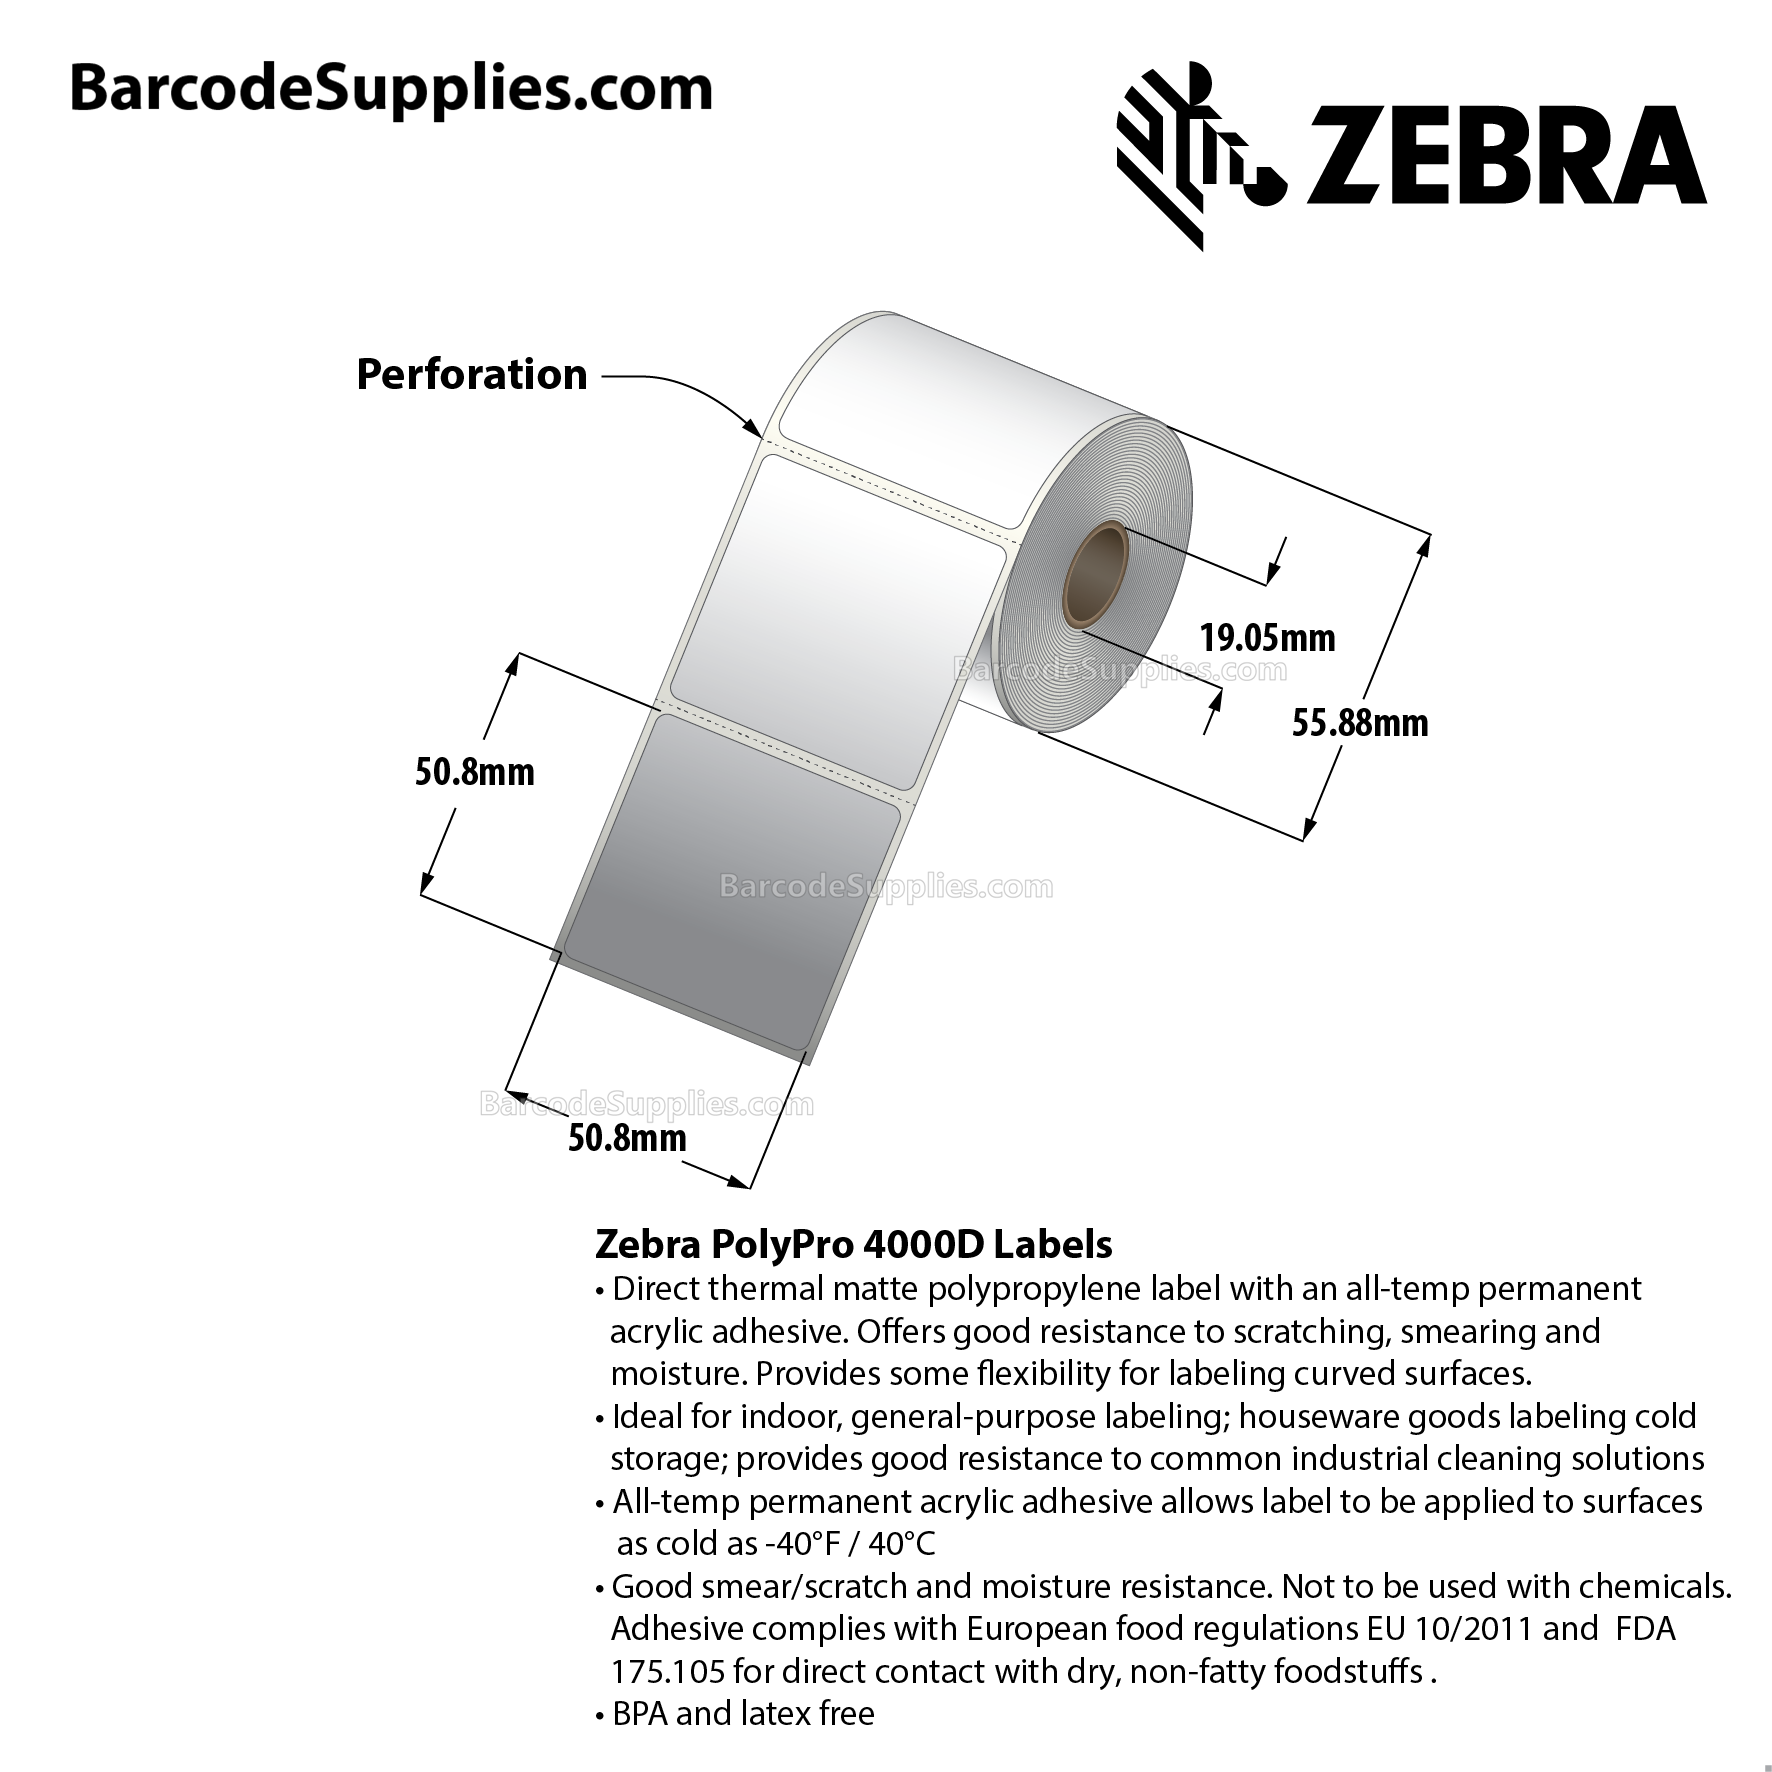 2 x 2 Direct Thermal White PolyPro 4000D Labels With All-Temp Adhesive - Perforated - 245 Labels Per Roll - Carton Of 12 Rolls - 2940 Labels Total - MPN: 10015779